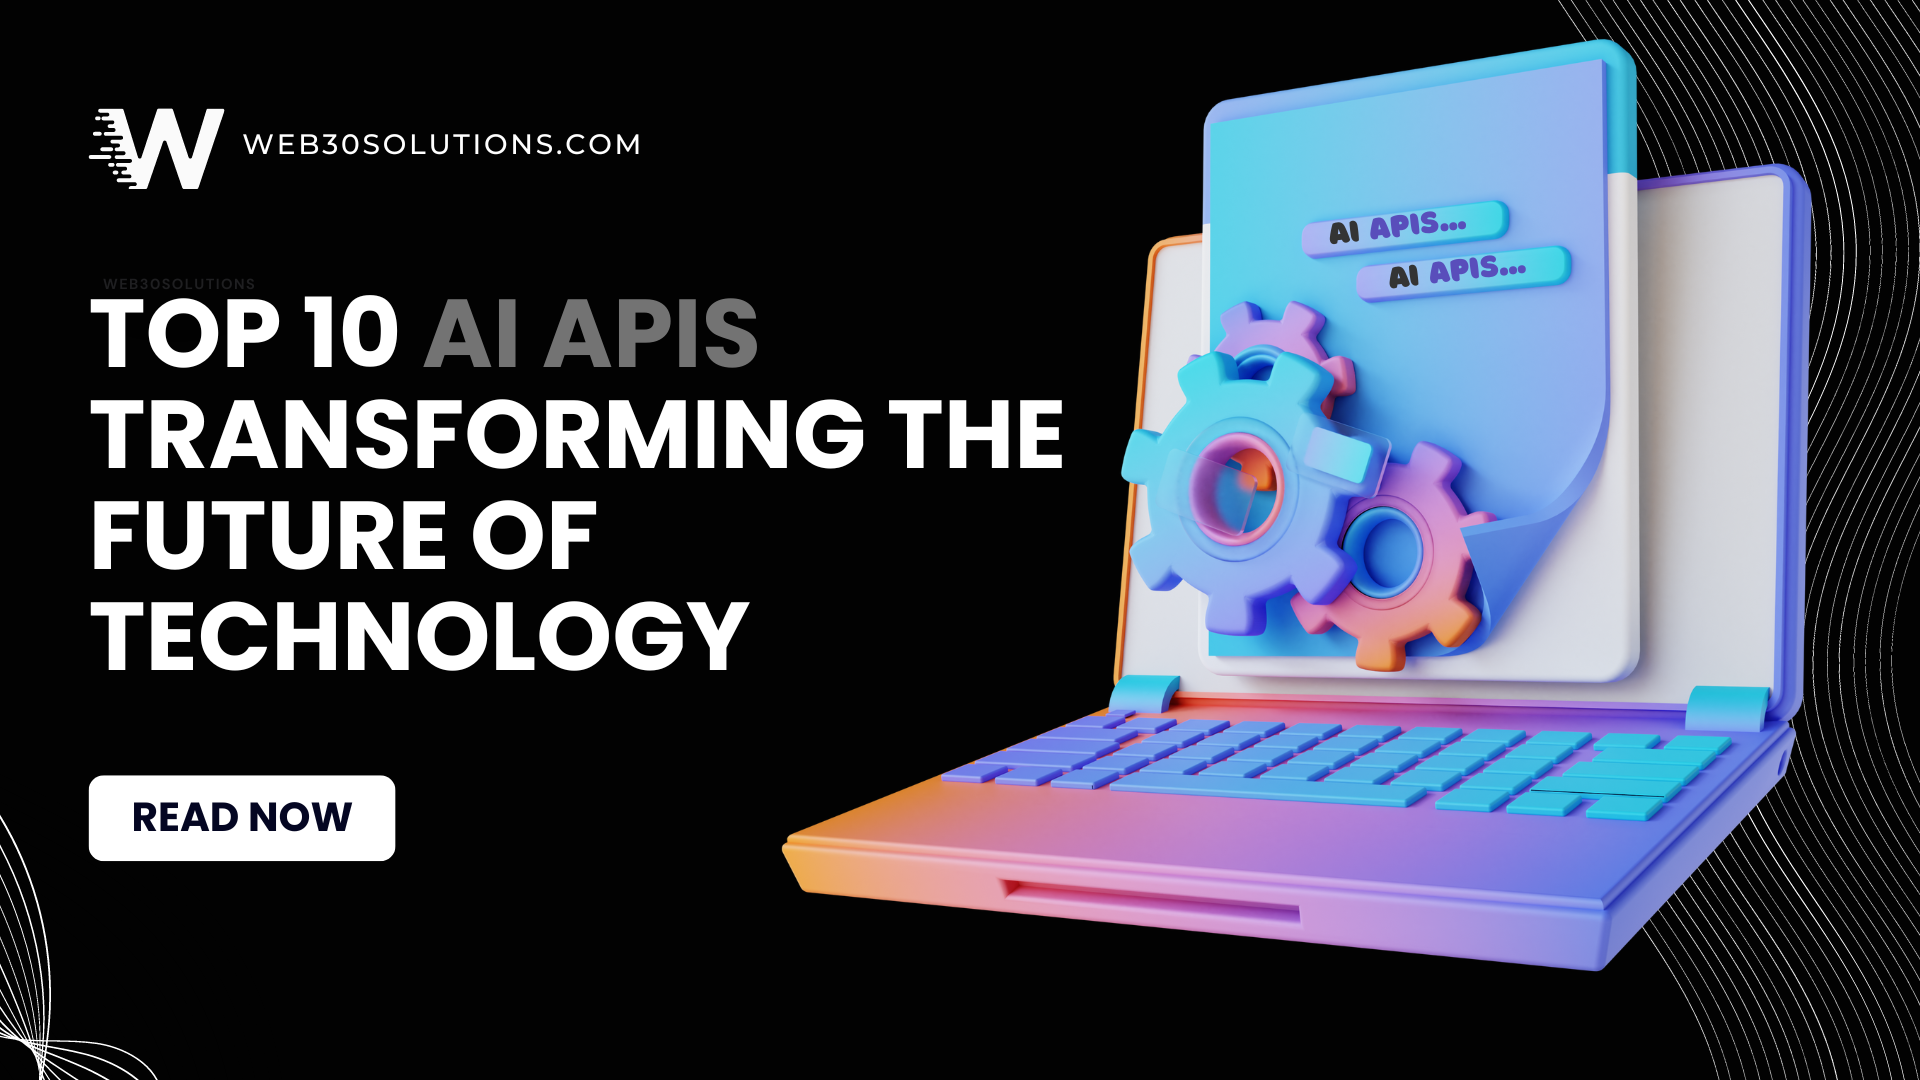 Top 10 AI APIs Transforming the Future of Technology